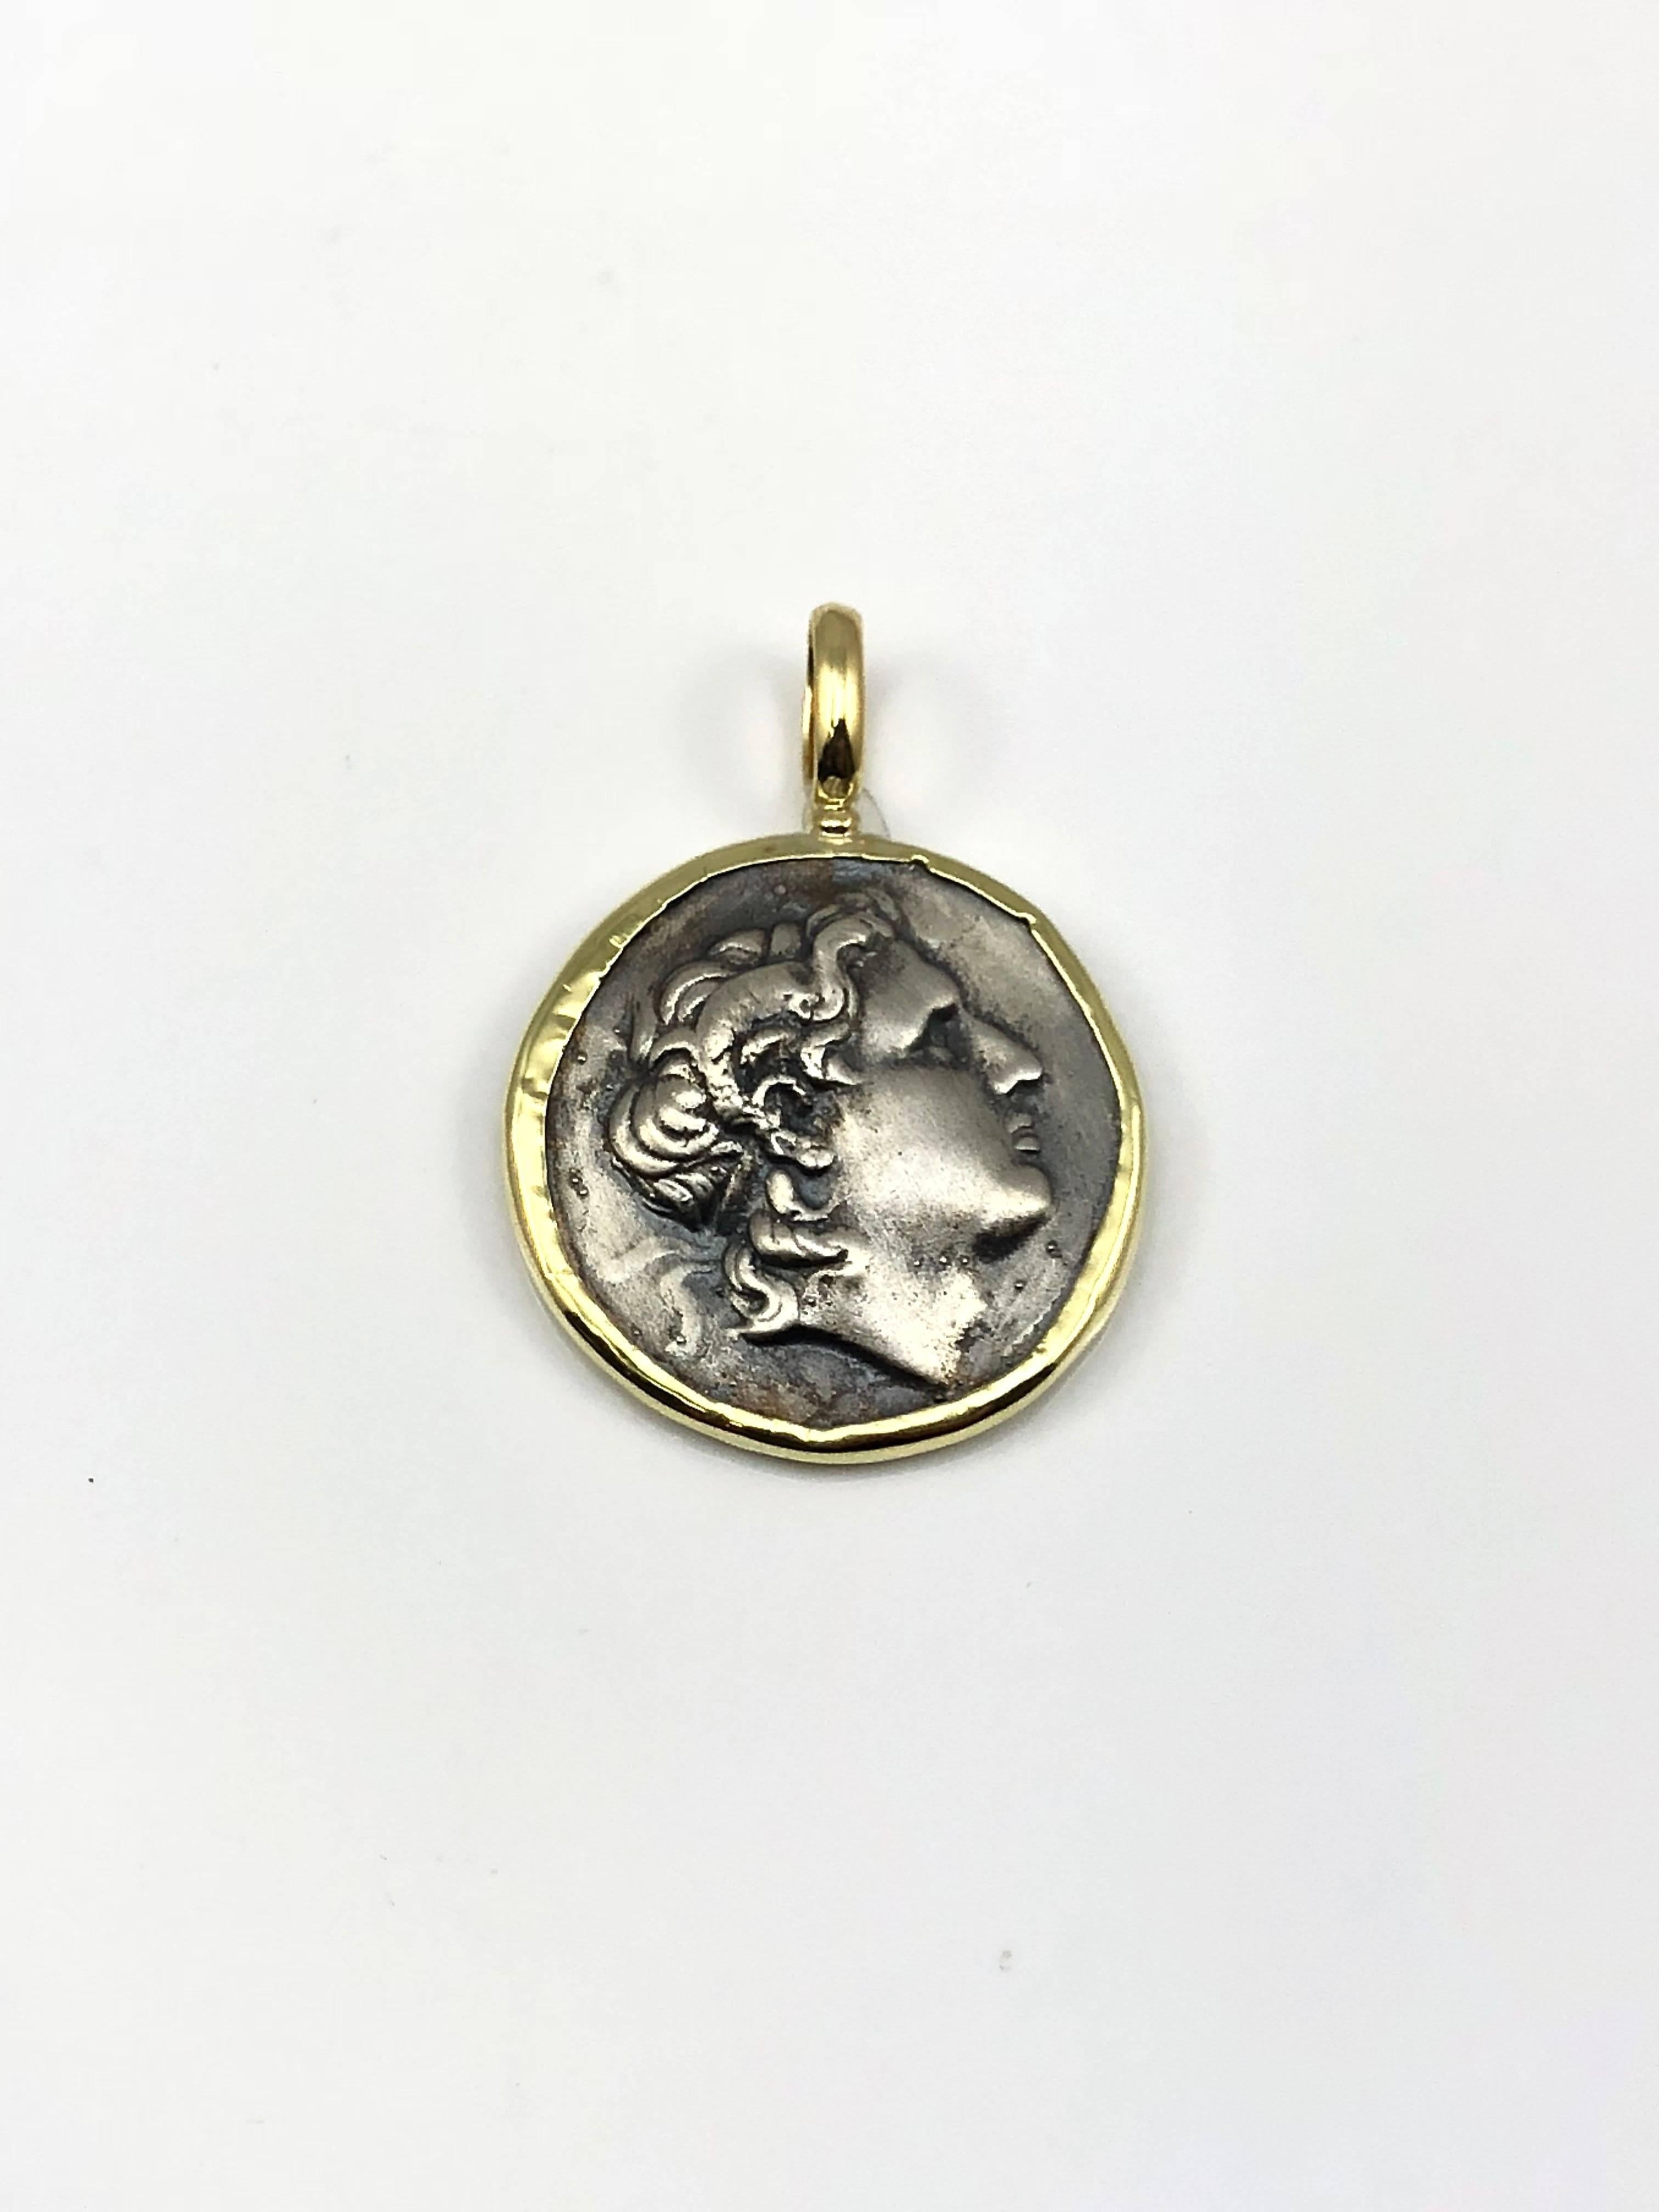 S.Georgios designer 18 Karat Yellow Gold handmade Pendant Necklace featuring a replica of an Ancient Greek Alexander The Great Coin in Silver 925. The beautiful coin has a reverse side and can be worn both ways and the rim and hook of the pendant